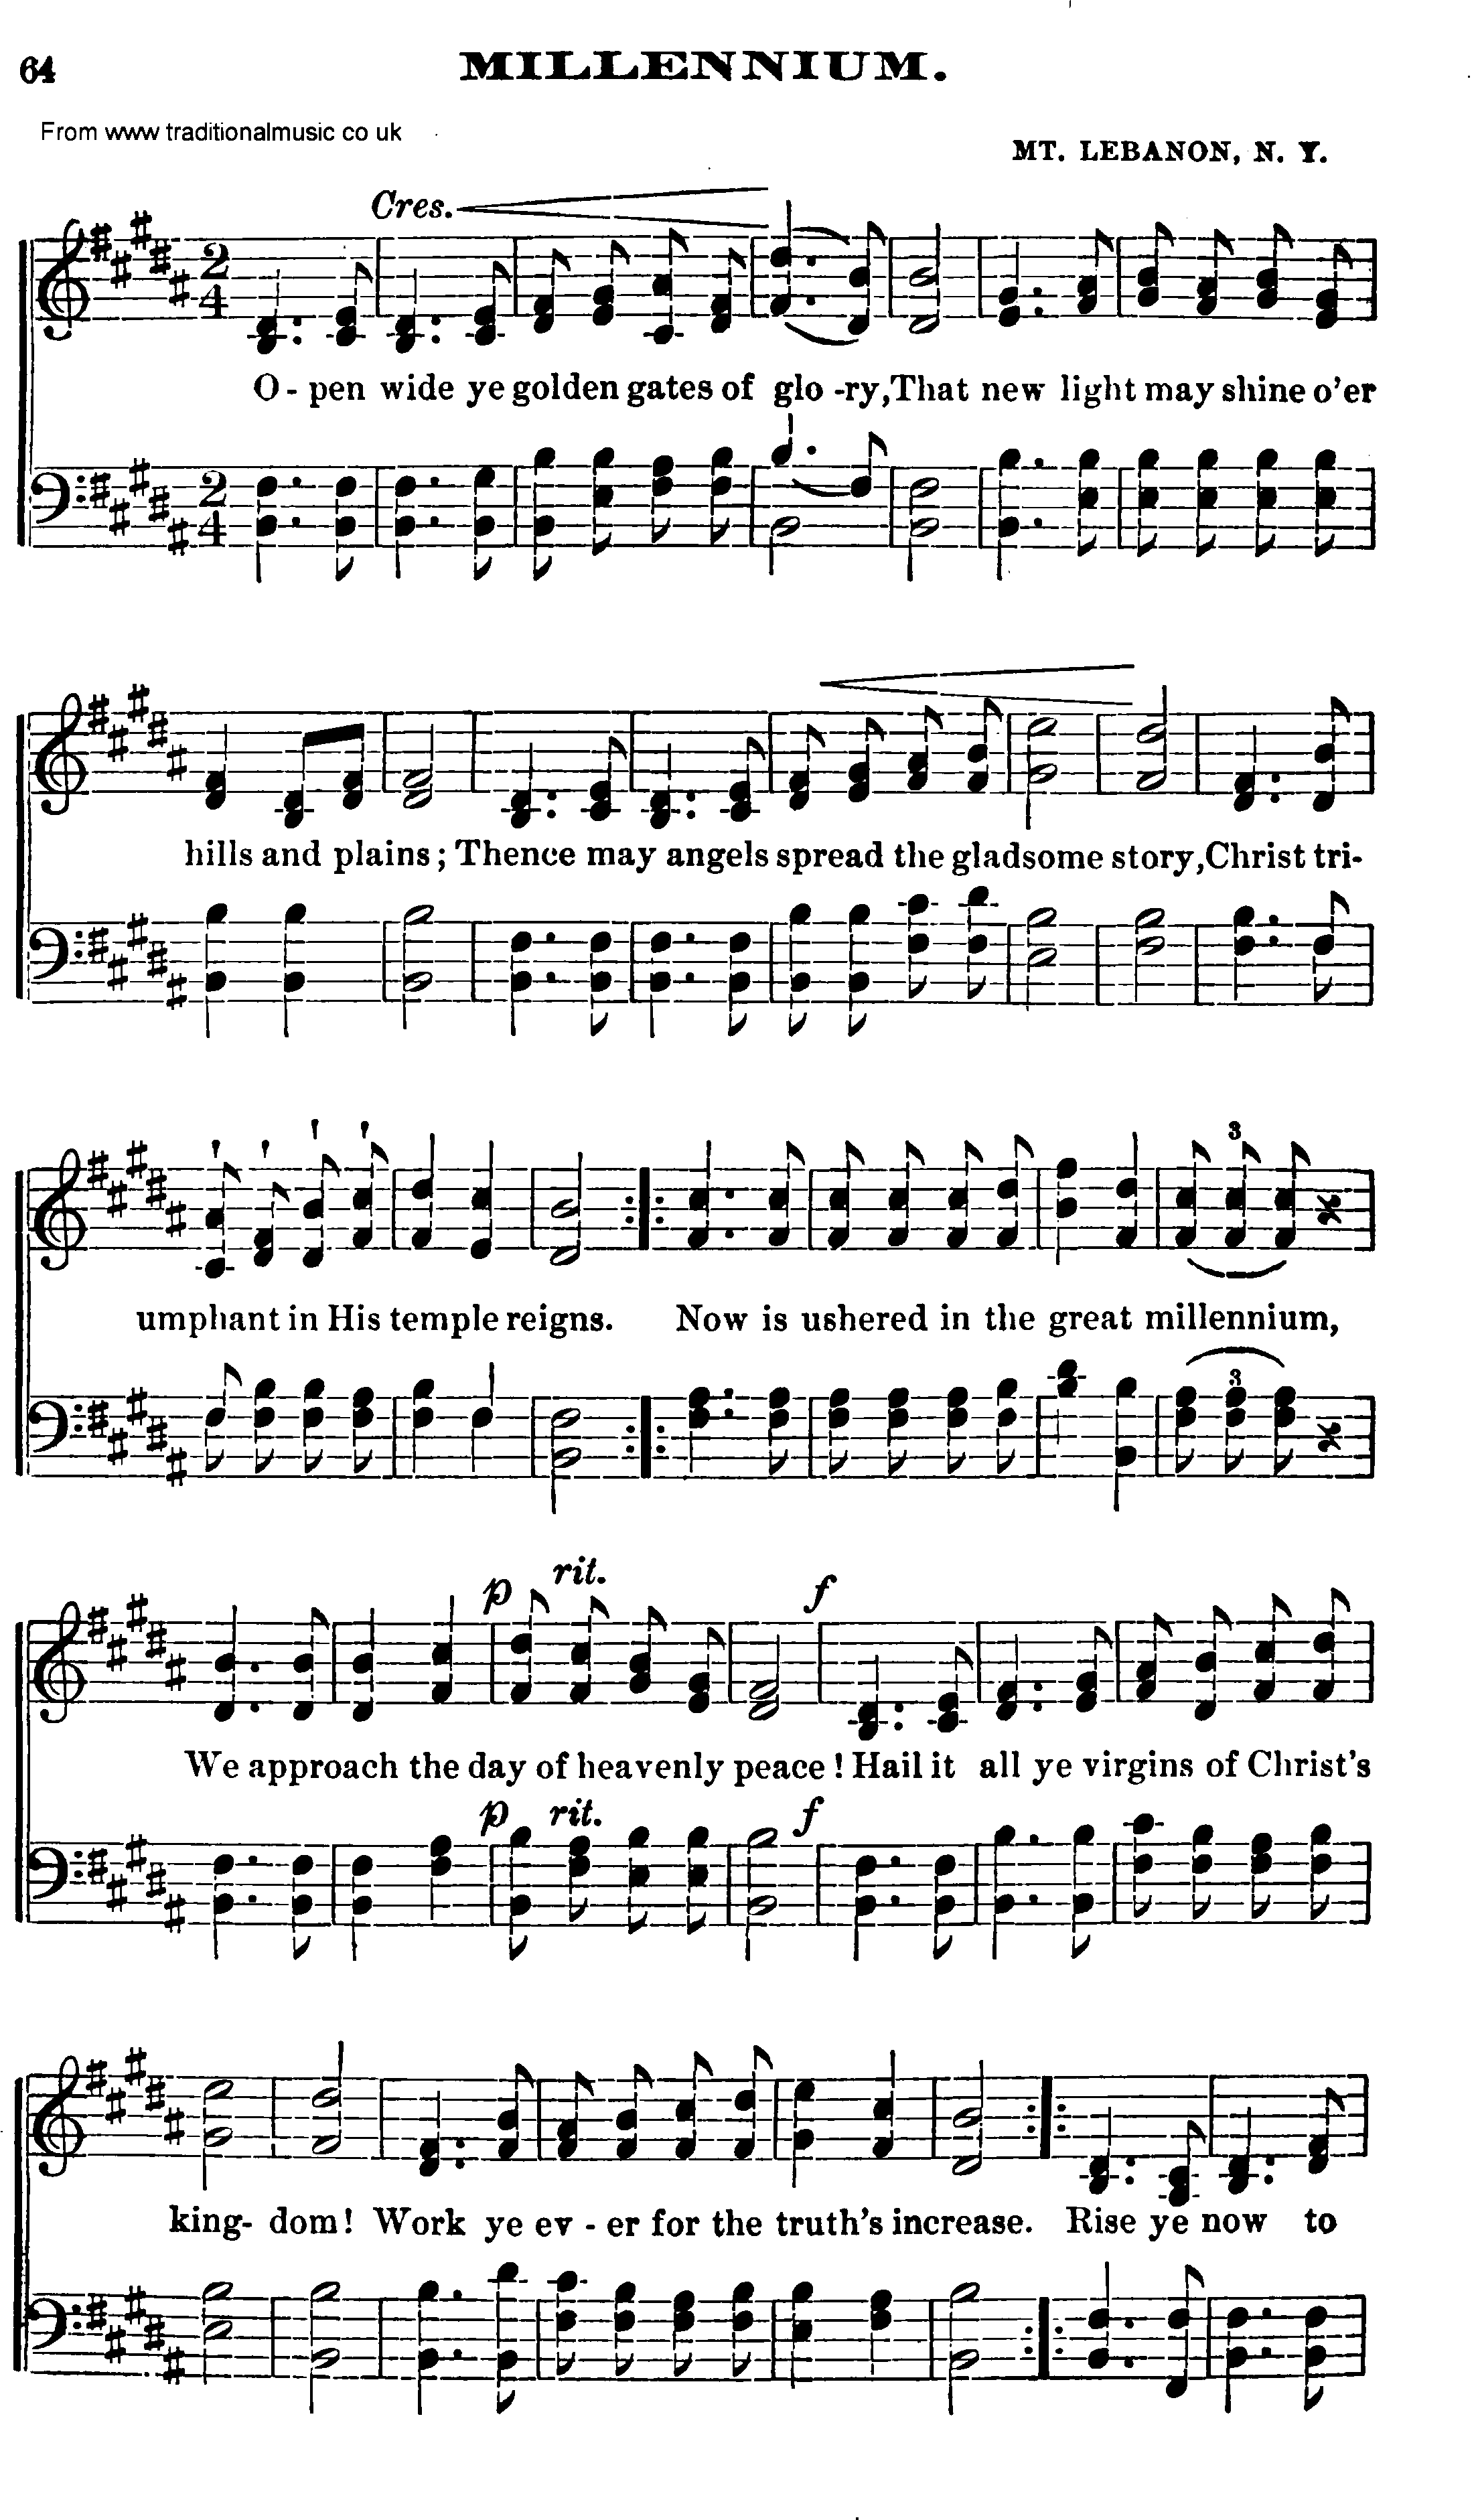 Shaker Music collection, Hymn: Millennium, sheetmusic and PDF